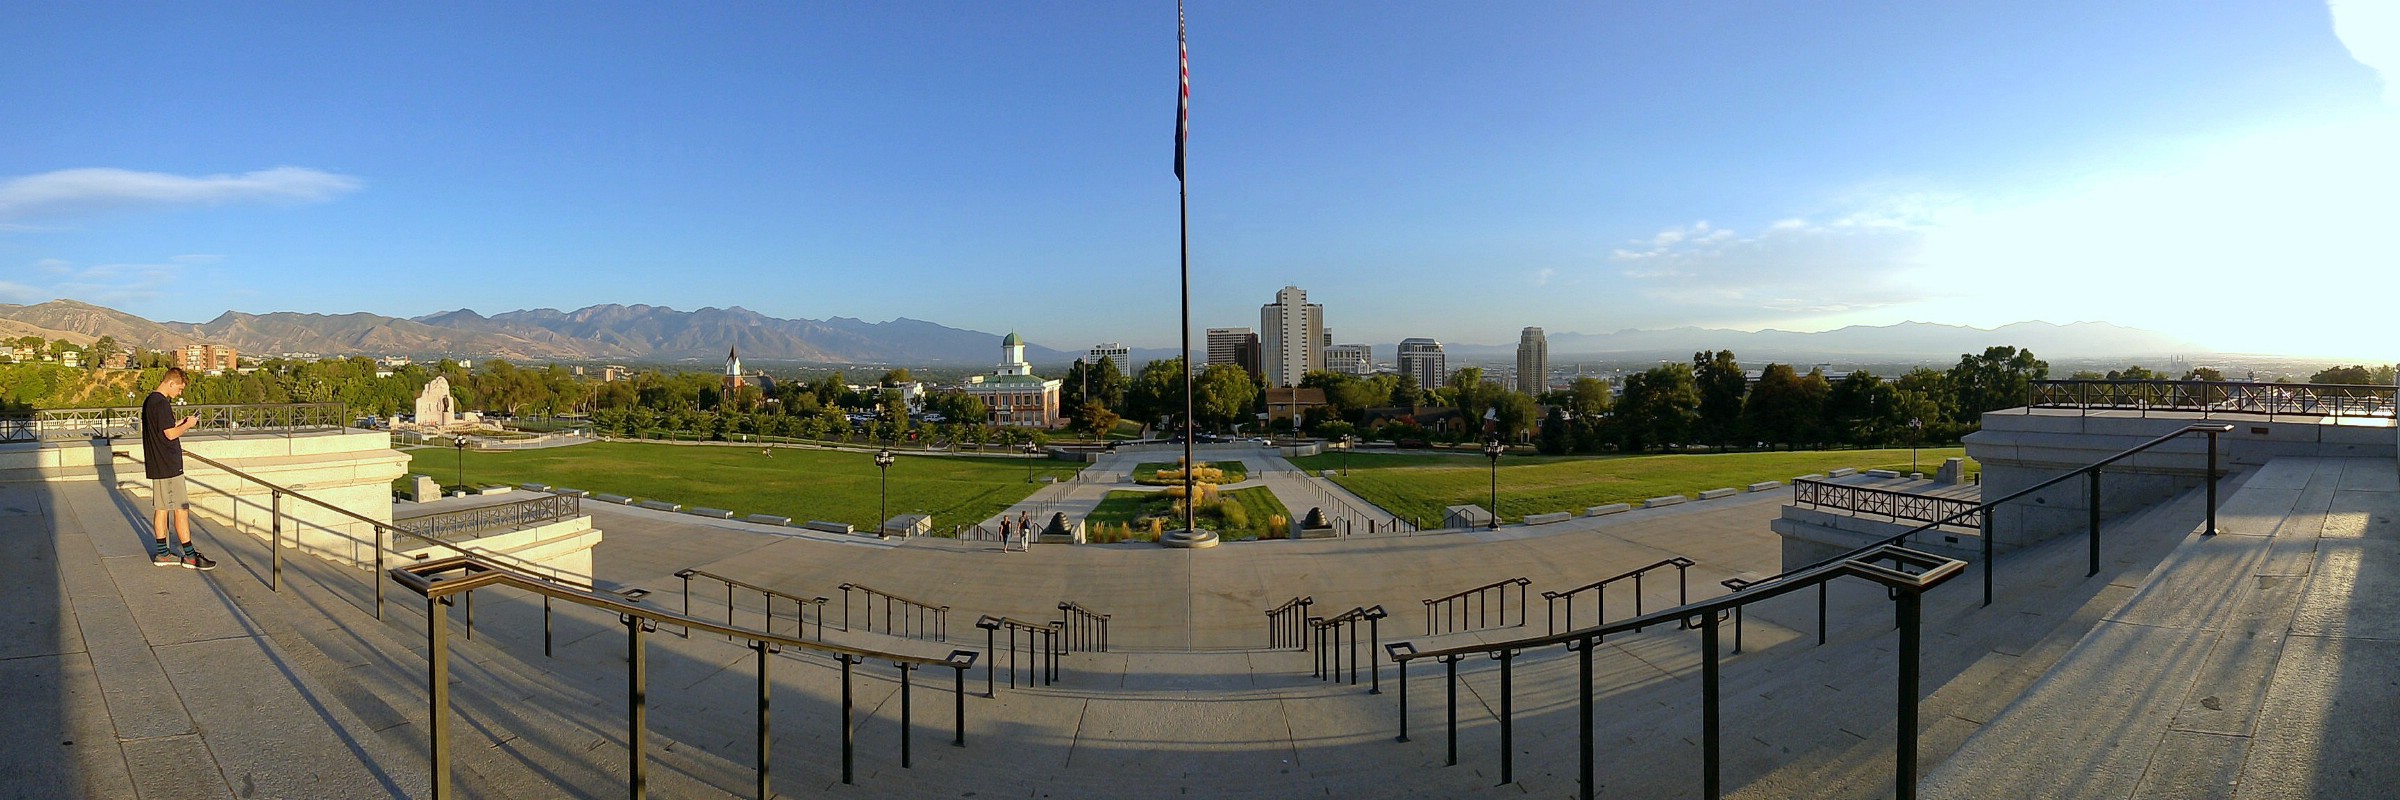 Salt Lake City at sunset as seen from the steps of the State Capitol Building. Salt Lake City, Utah. September 6, 2016. 